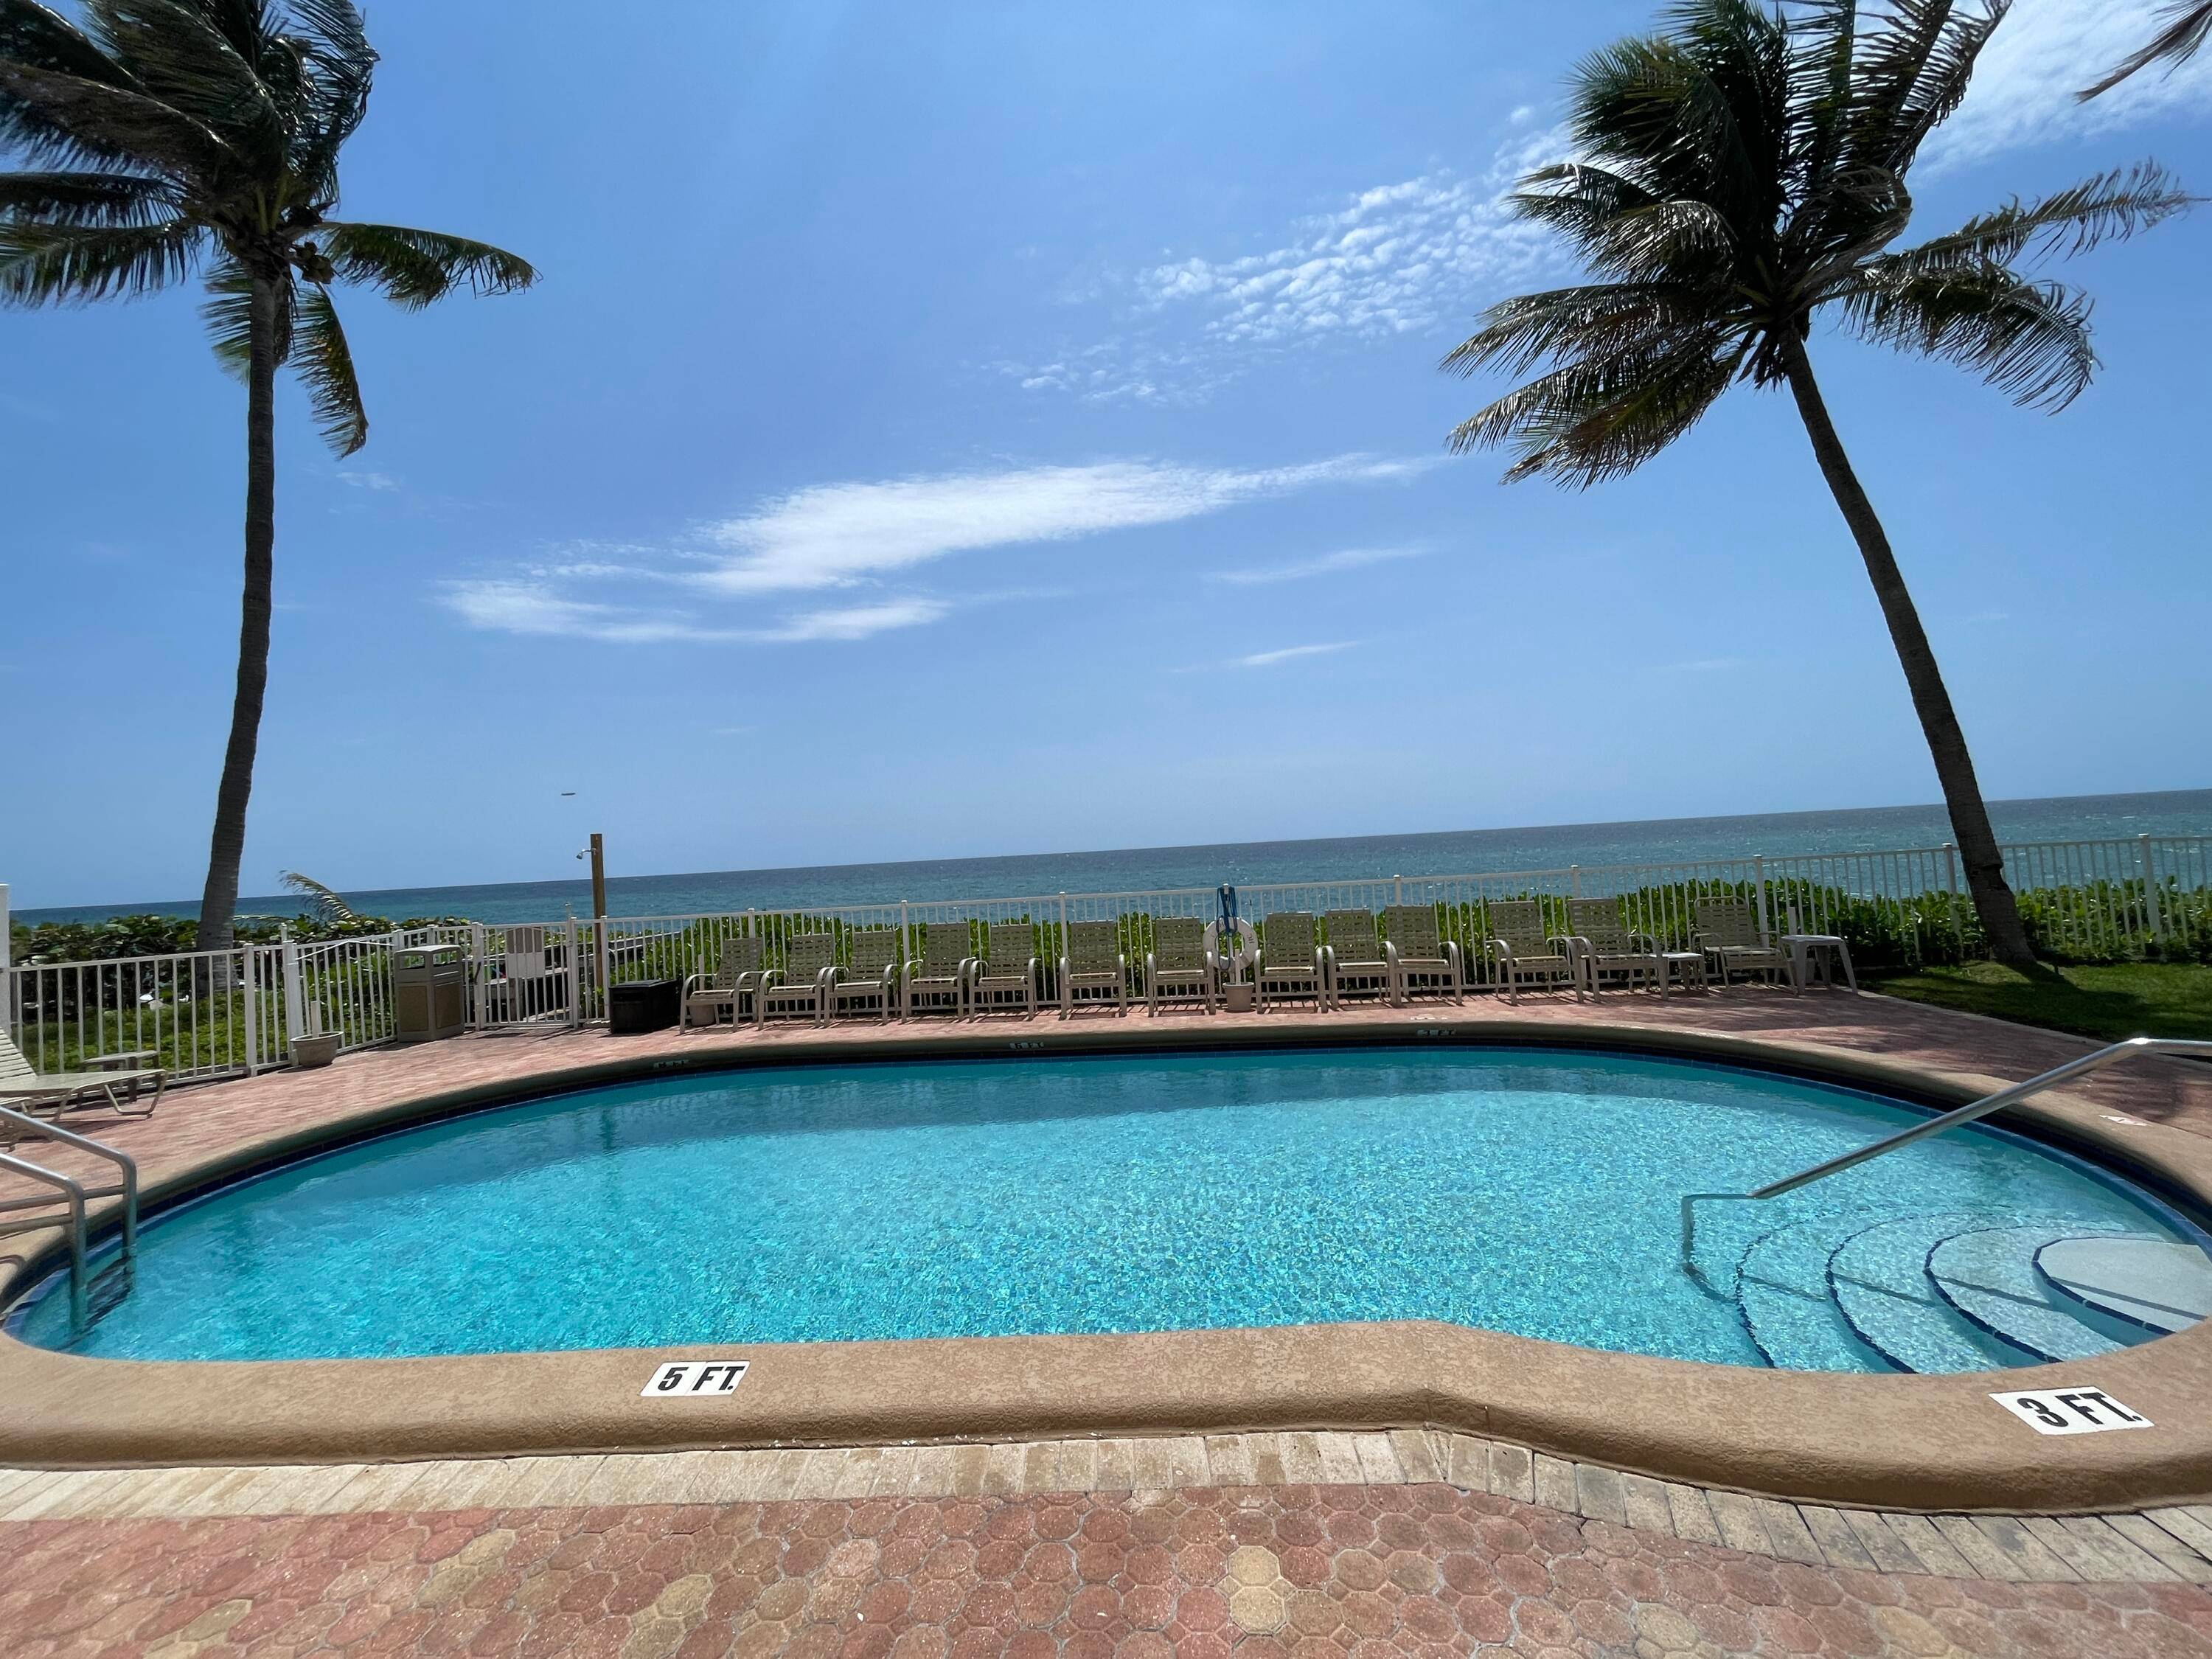 Enjoy living on the Ocean with this 2 bedroom, 2 bath home which is located directly on the Atlantic Ocean on Hillsboro Beach and also has Intercoastal views.